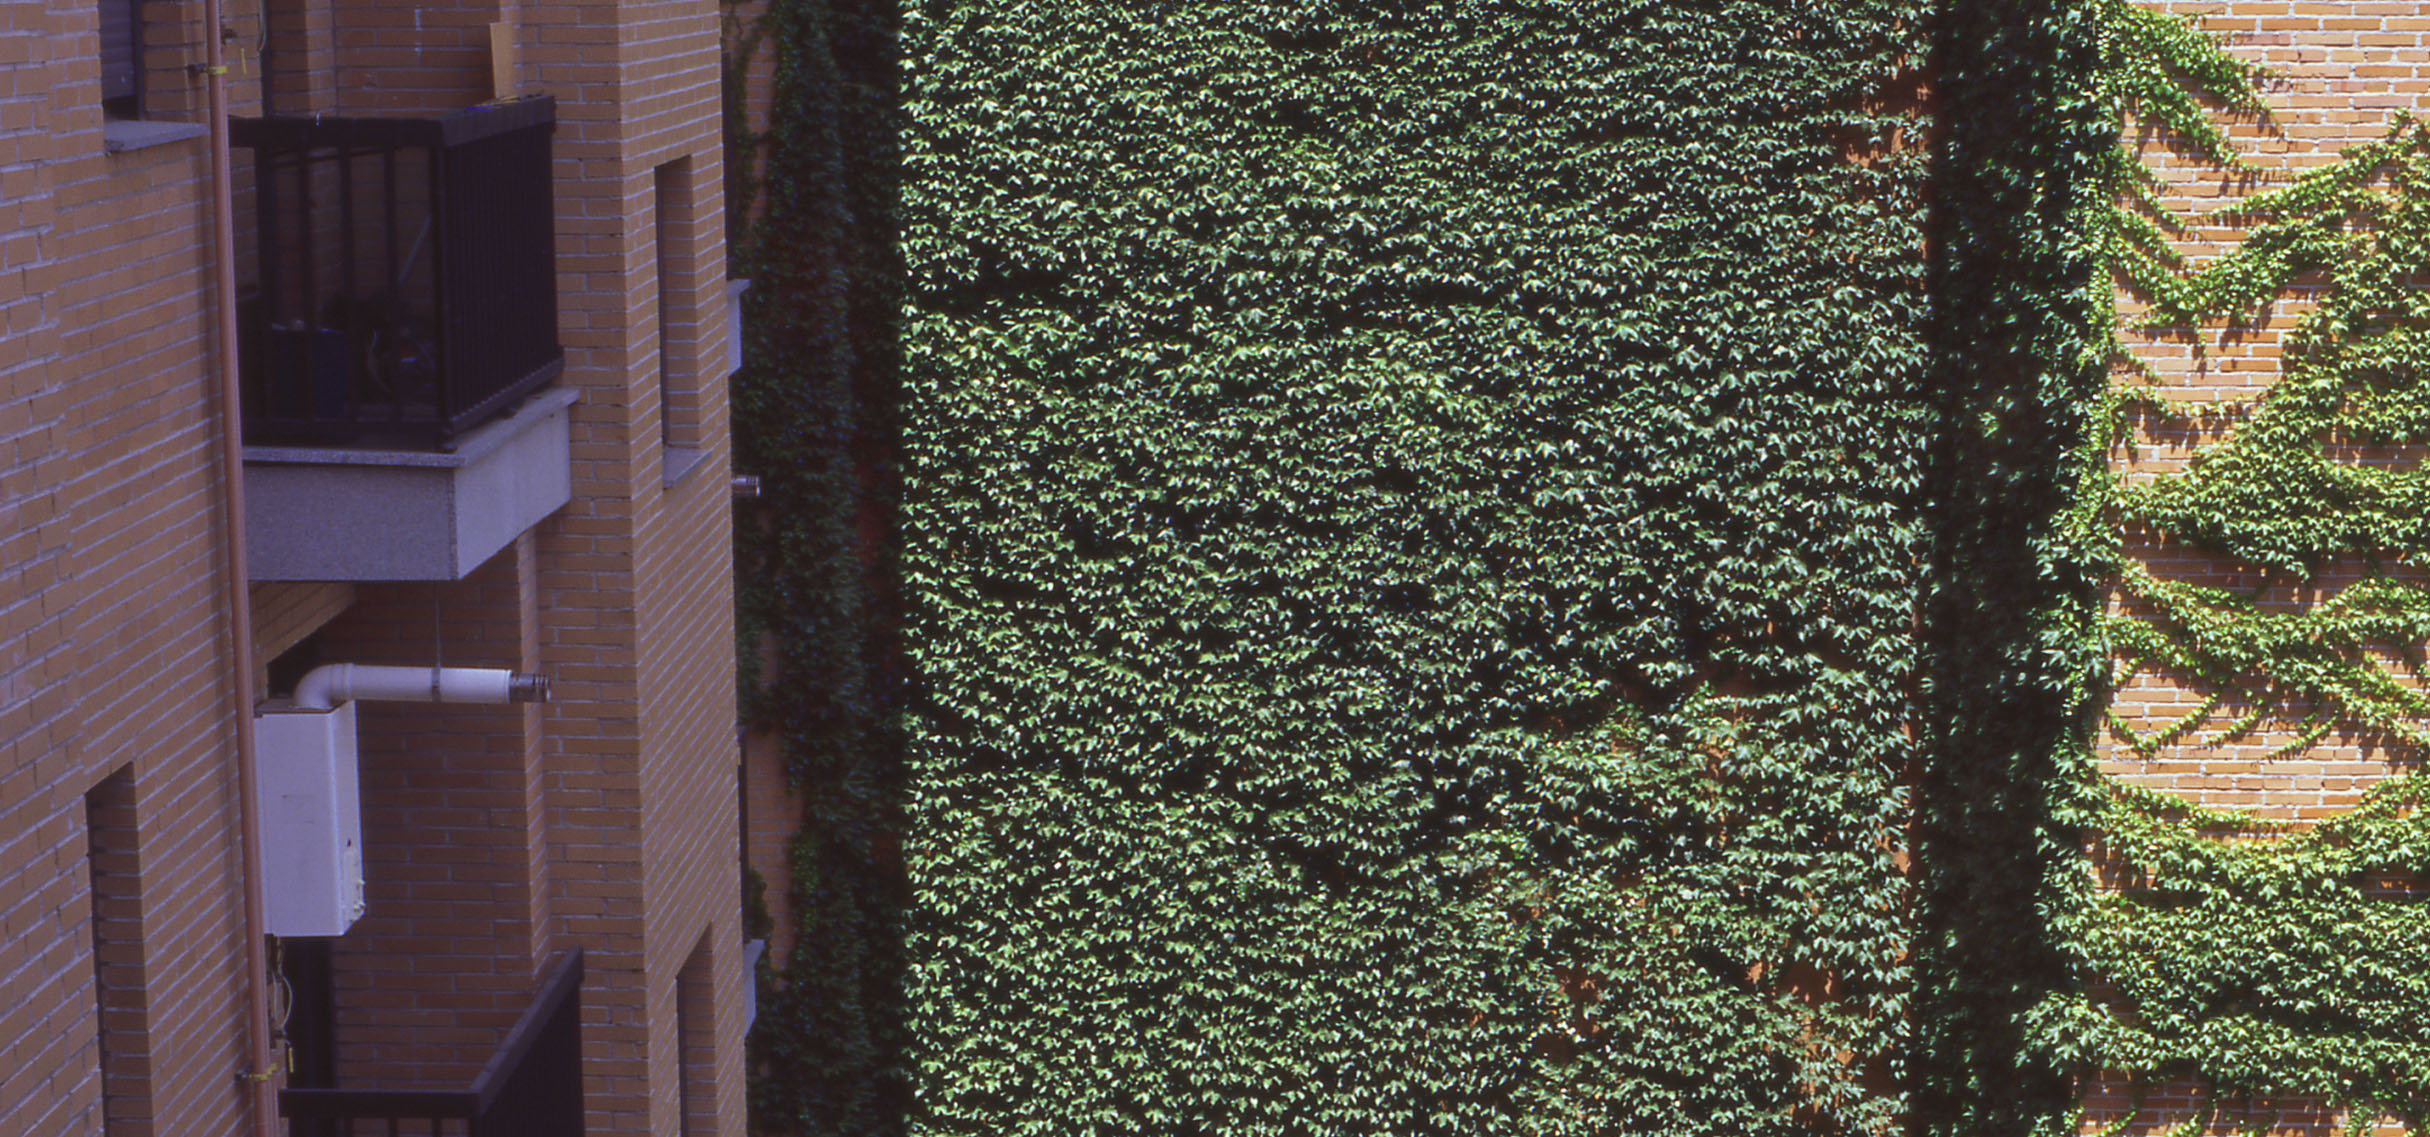 Pleasant indoor garden with ivy wall, a haven of peace in the big city